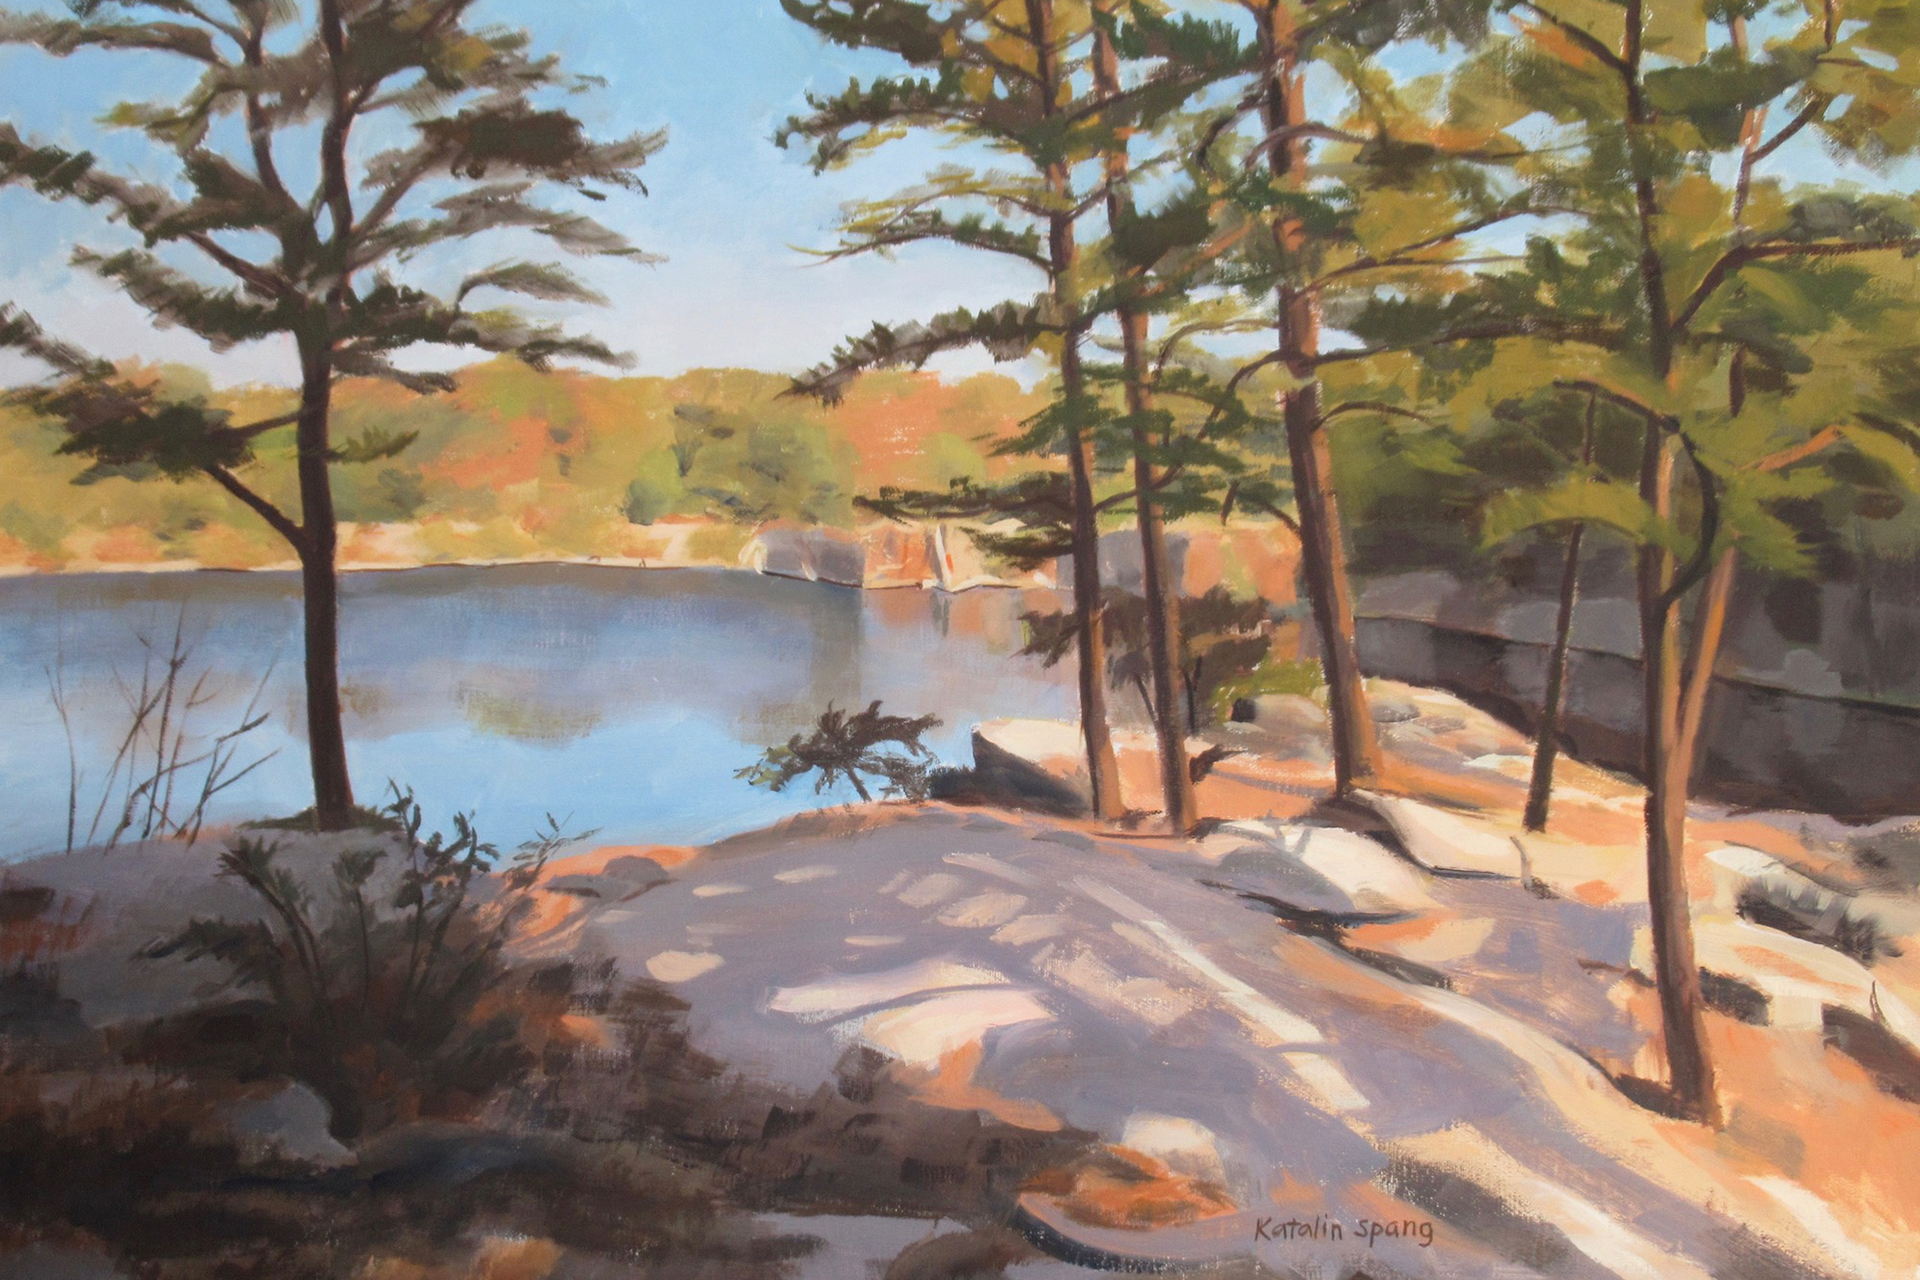 Landscape painting looking out over a lake through sparse trees